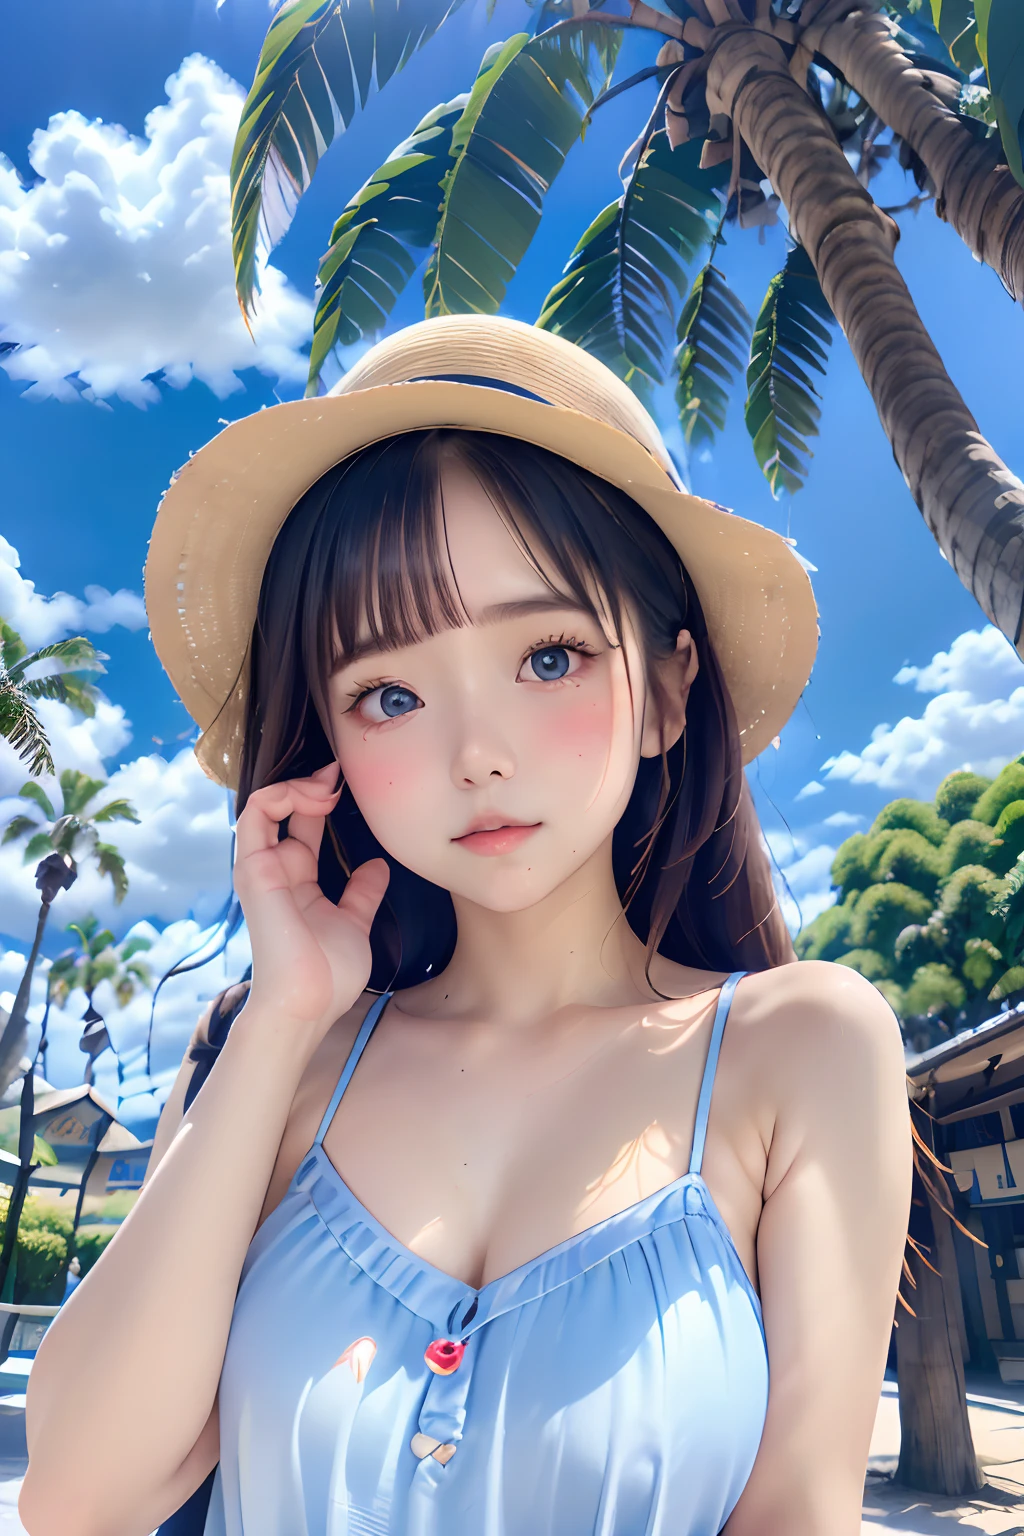 ((Extremely detailed)),, (8K), Best Quality, (Beautiful),((masutepiece)), ((Best Quality)), 14years、Beautiful girls,Realistic portraits,a straw fedora hat, (Ultra-detailed), ((kawaii)), Cute, (lovely),plein air、blured background:1.5、((South Island、Palm trees、Blue Sea、blue open sky、cumulonimbus clouds:1.2))